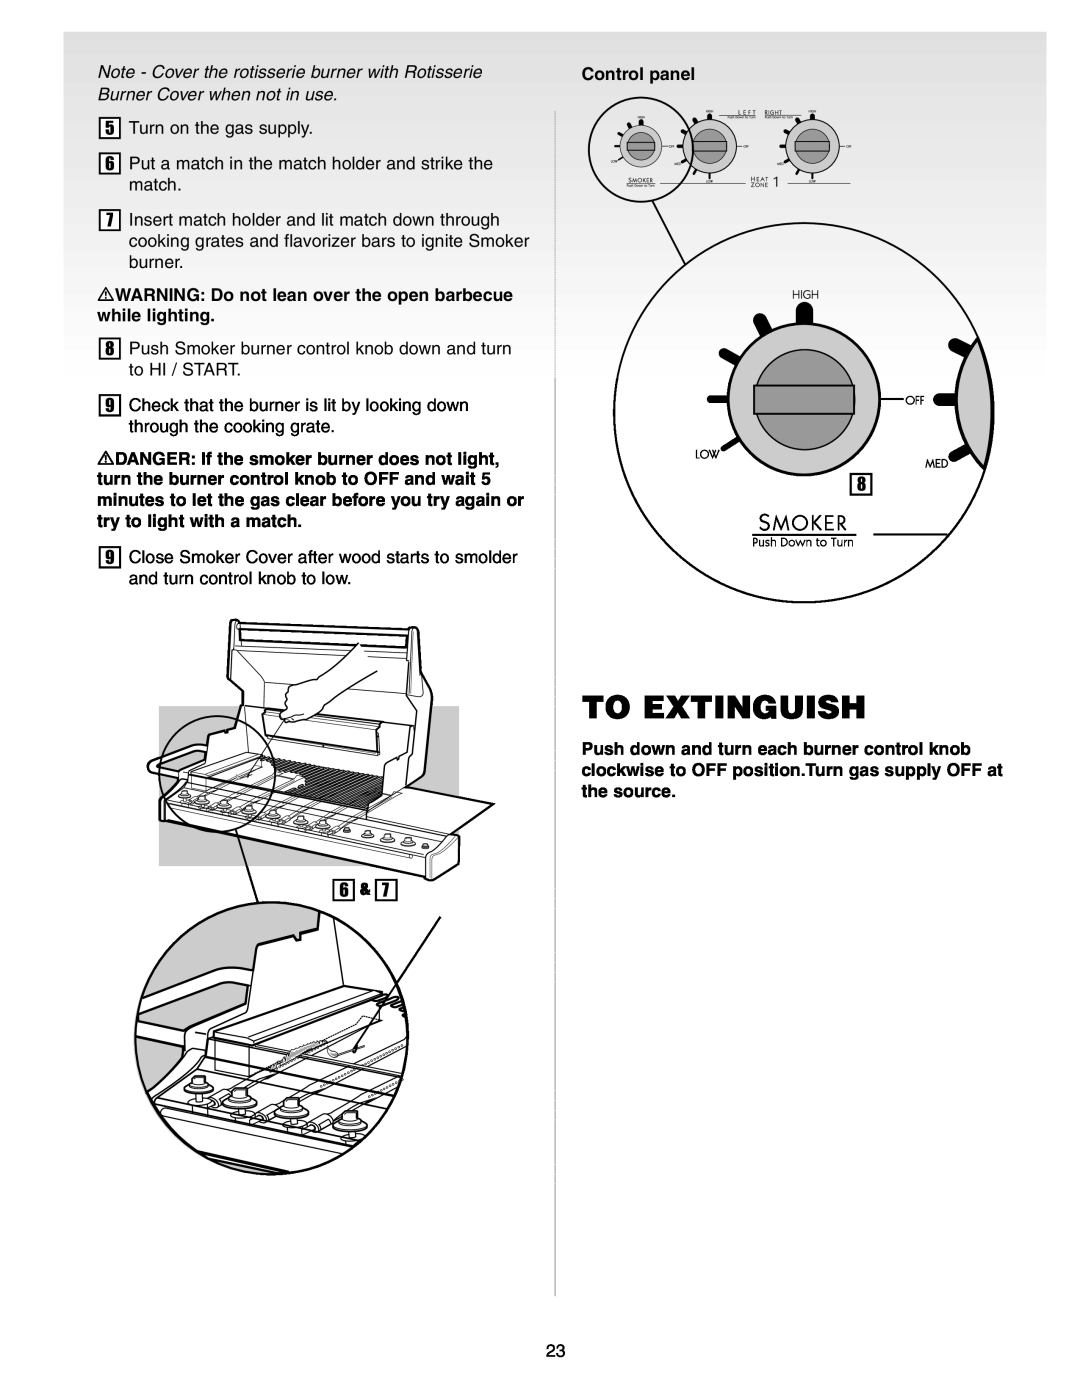 Weber Gas Burner manual To Extinguish, 5Turn on the gas supply 